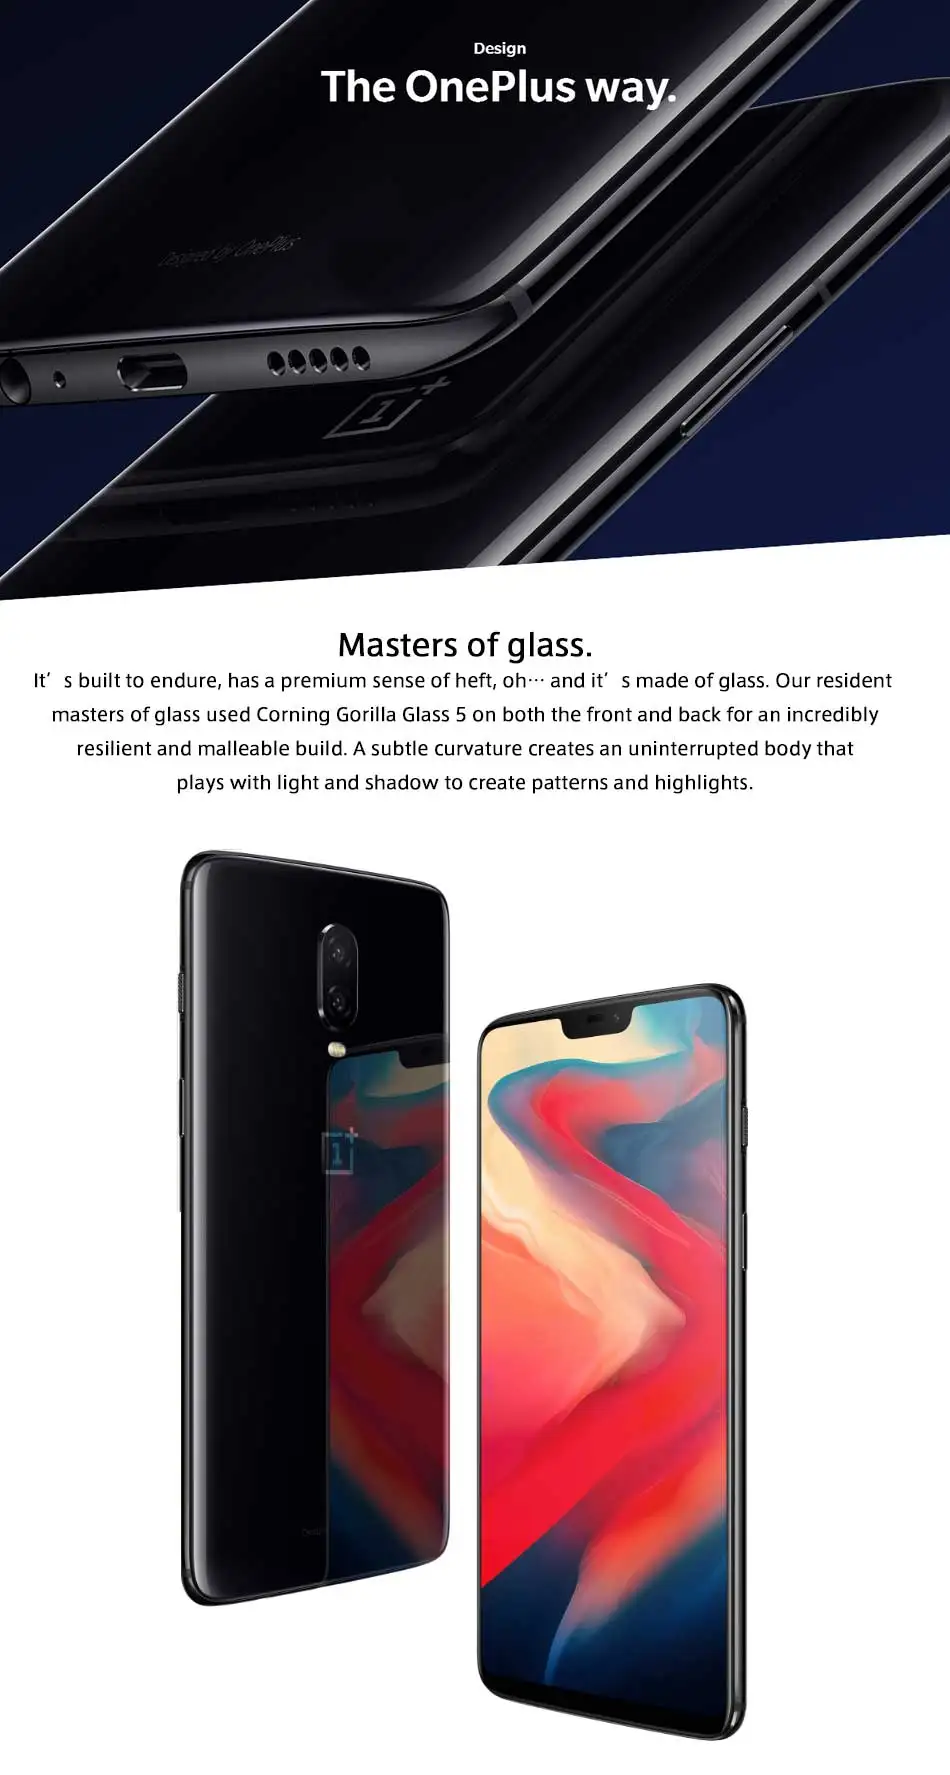 best oneplus mobile phone Original OnePlus 6 8GB 128GB Snapdragon 845 Octa Core AI Dual Camera 20MP+16MP Face ID Unlock Android 8 Smartphone Mobile phone oneplus one cell phone